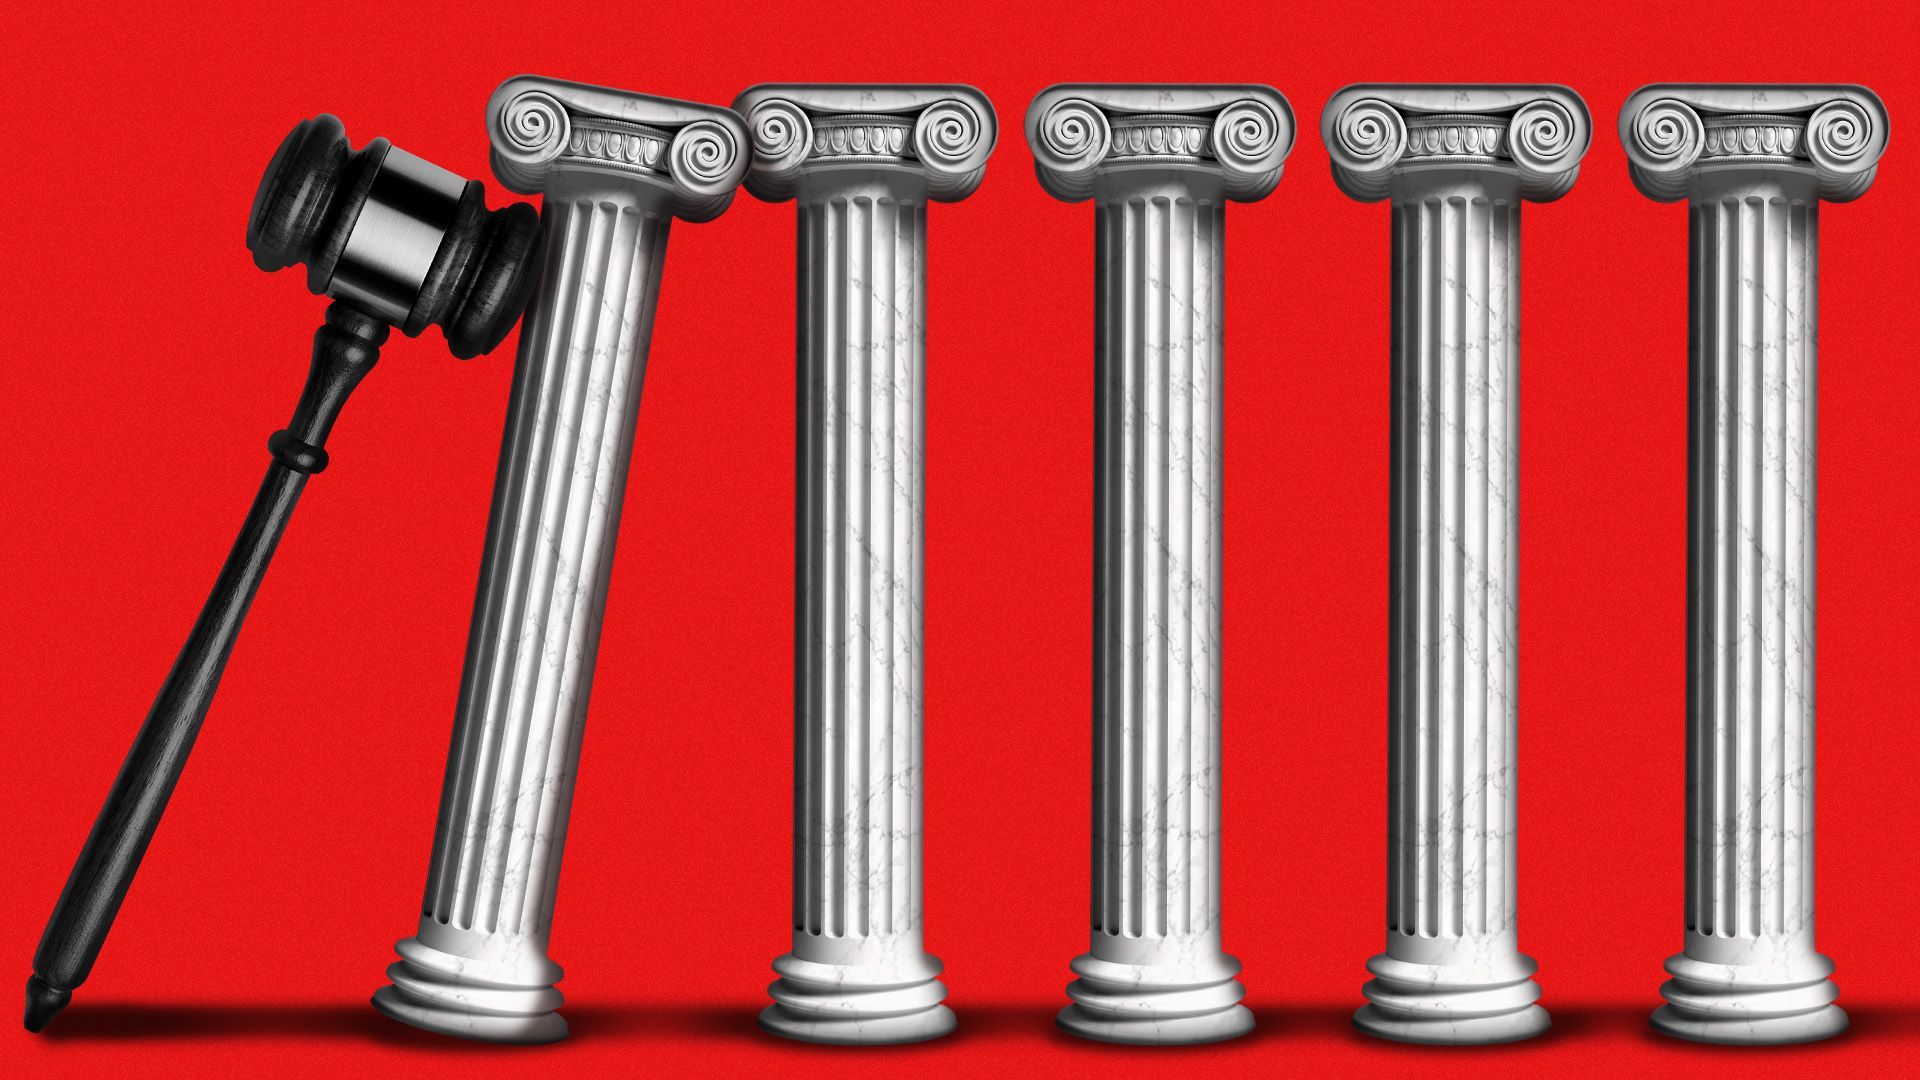 Illustration of a gavel knocking down a line of columns